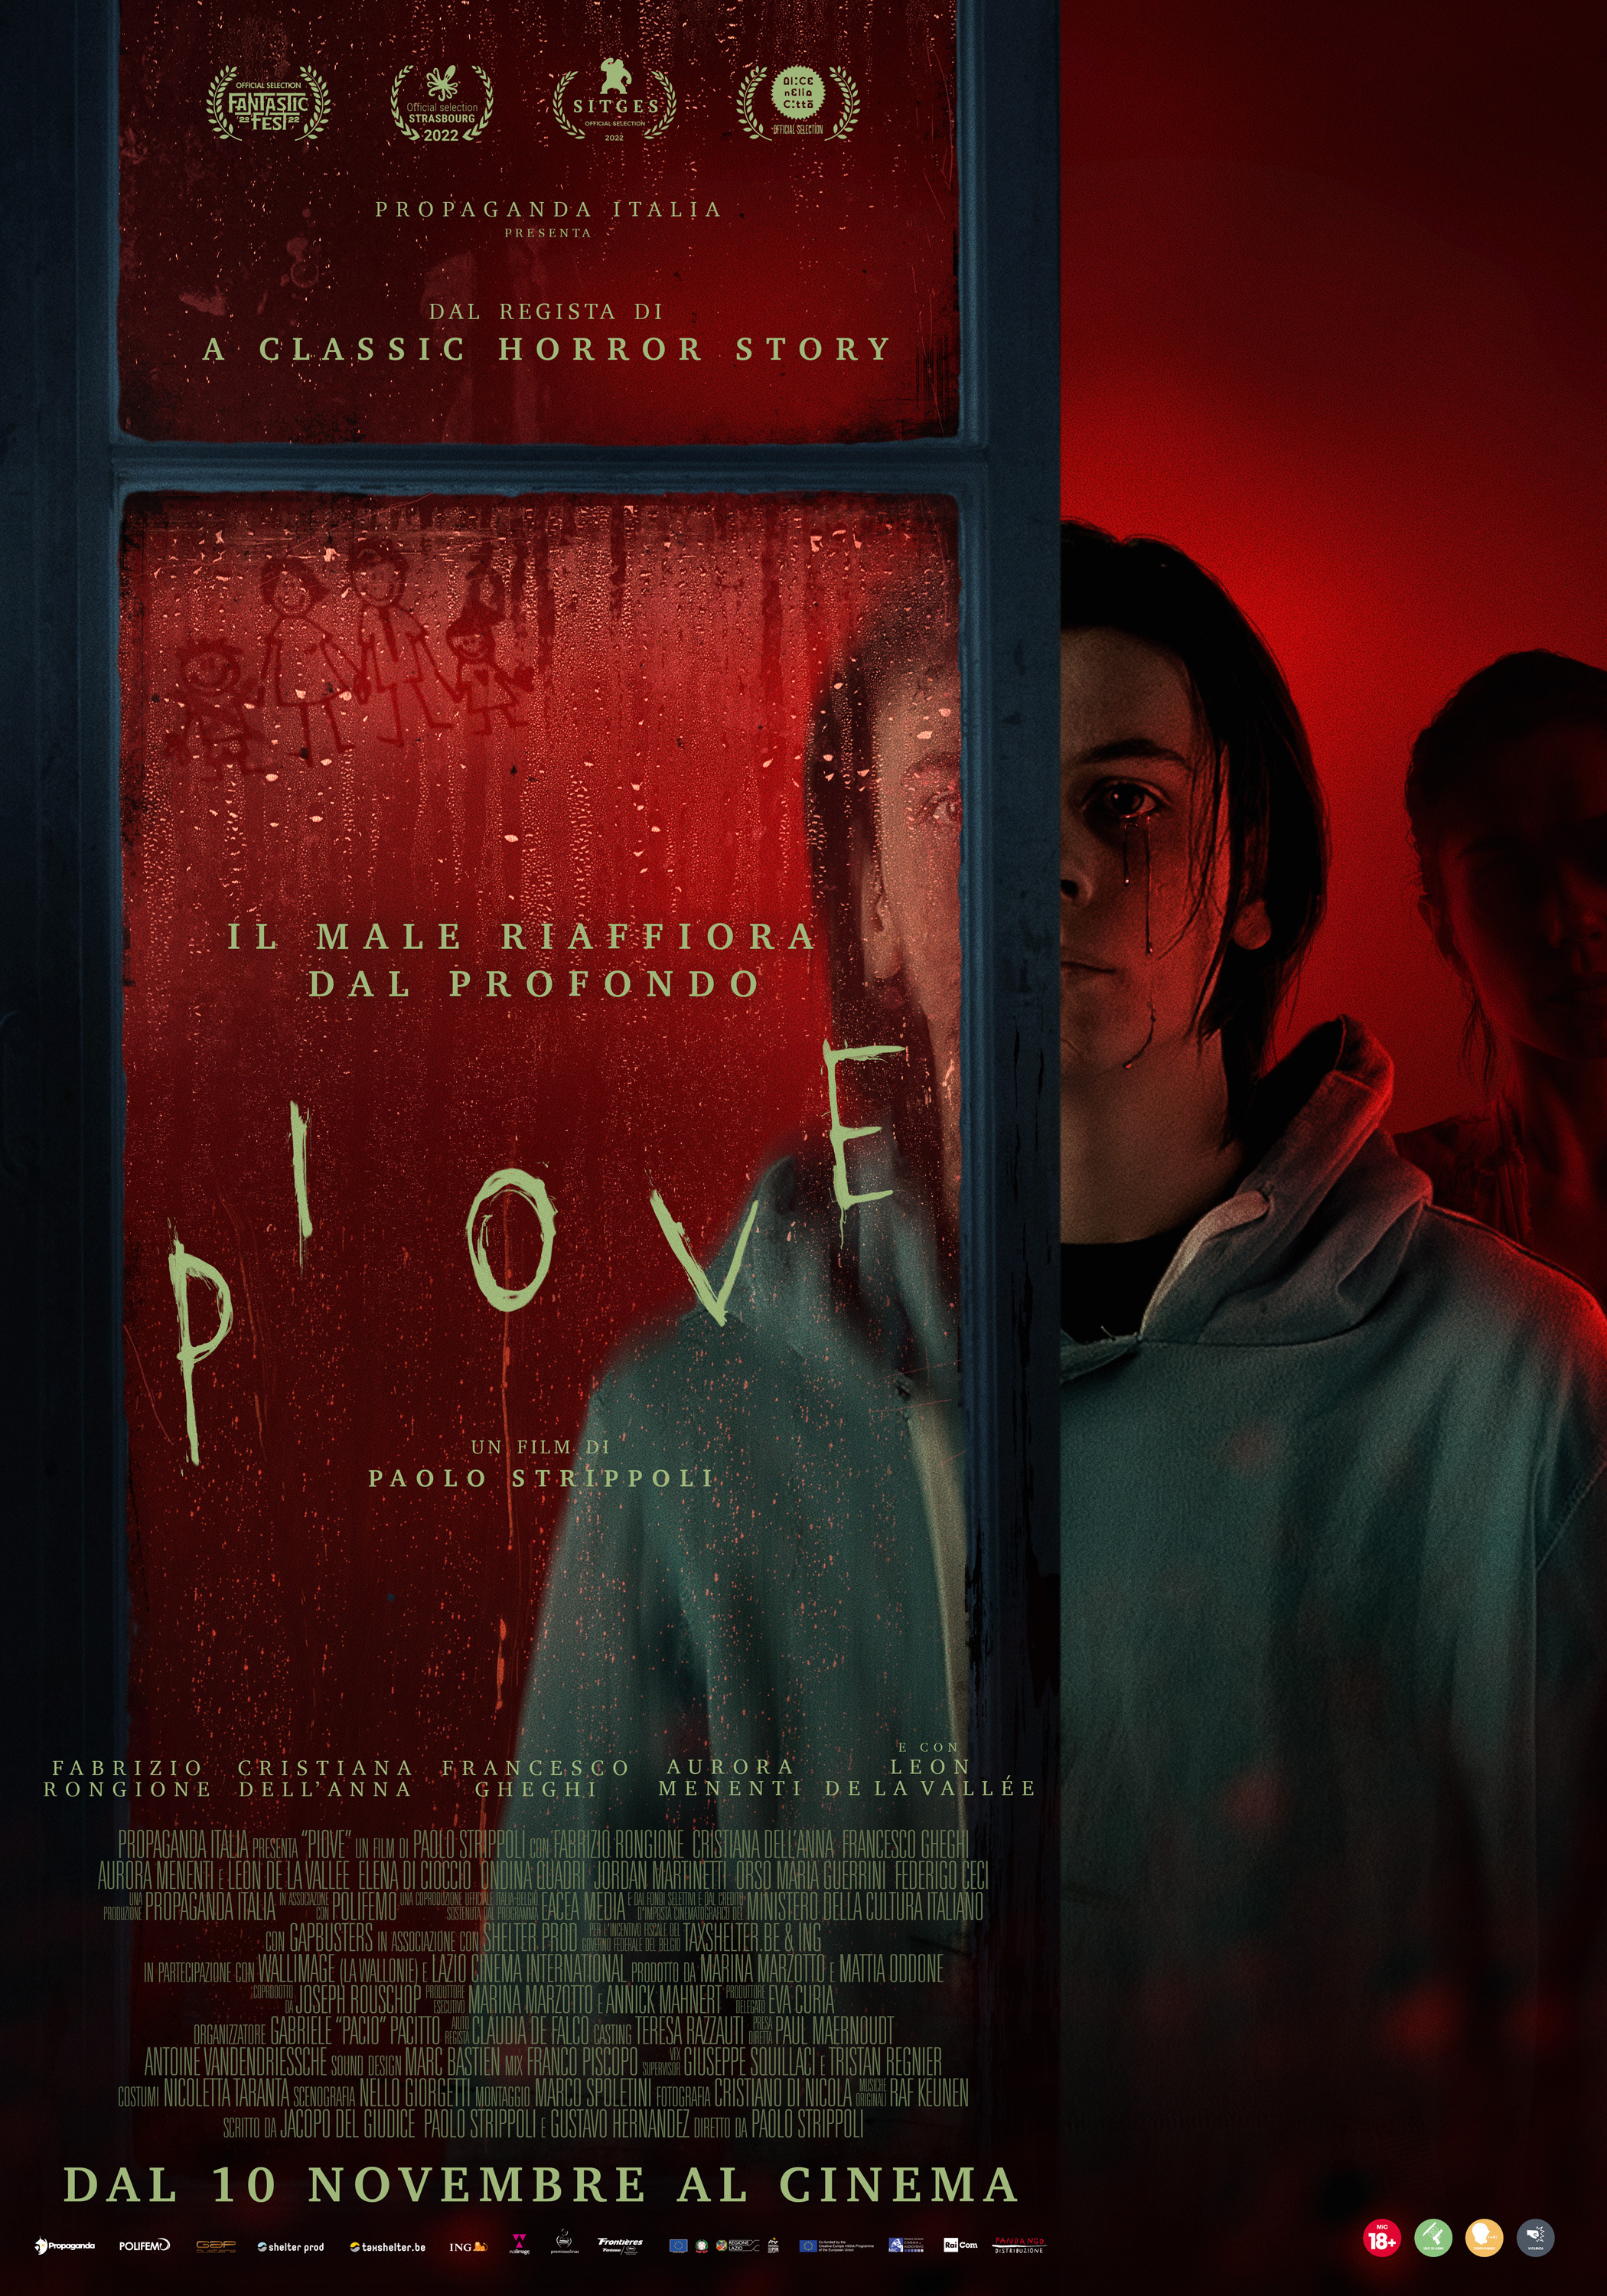 Mega Sized Movie Poster Image for Piove (#2 of 2)